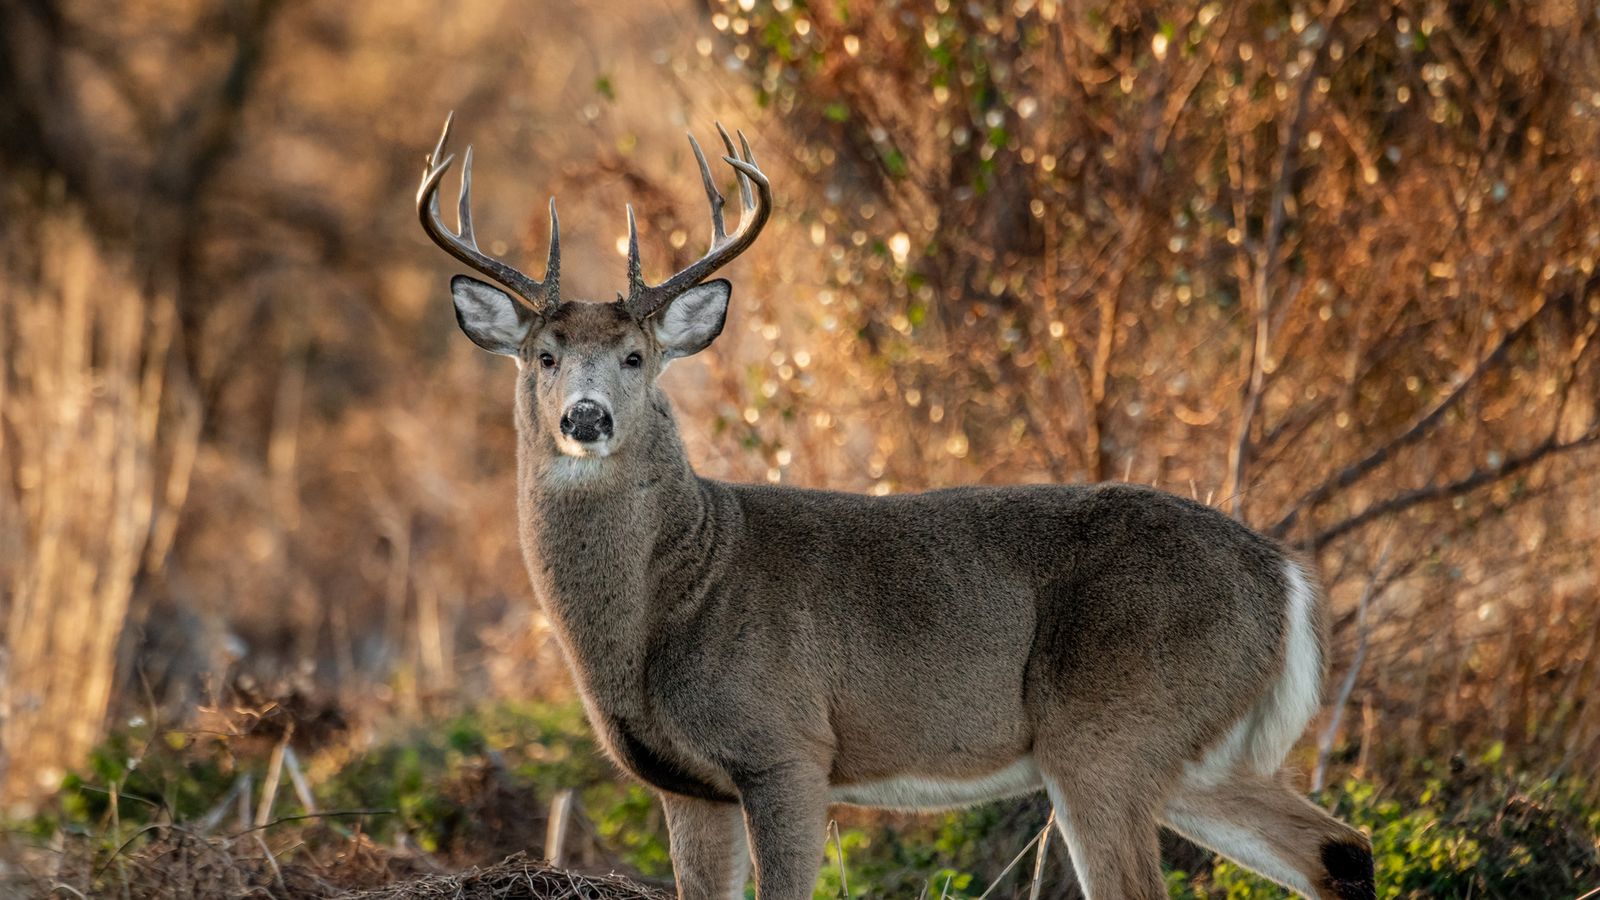 Arkansas hunter 'dies after being attacked by deer he thought he had